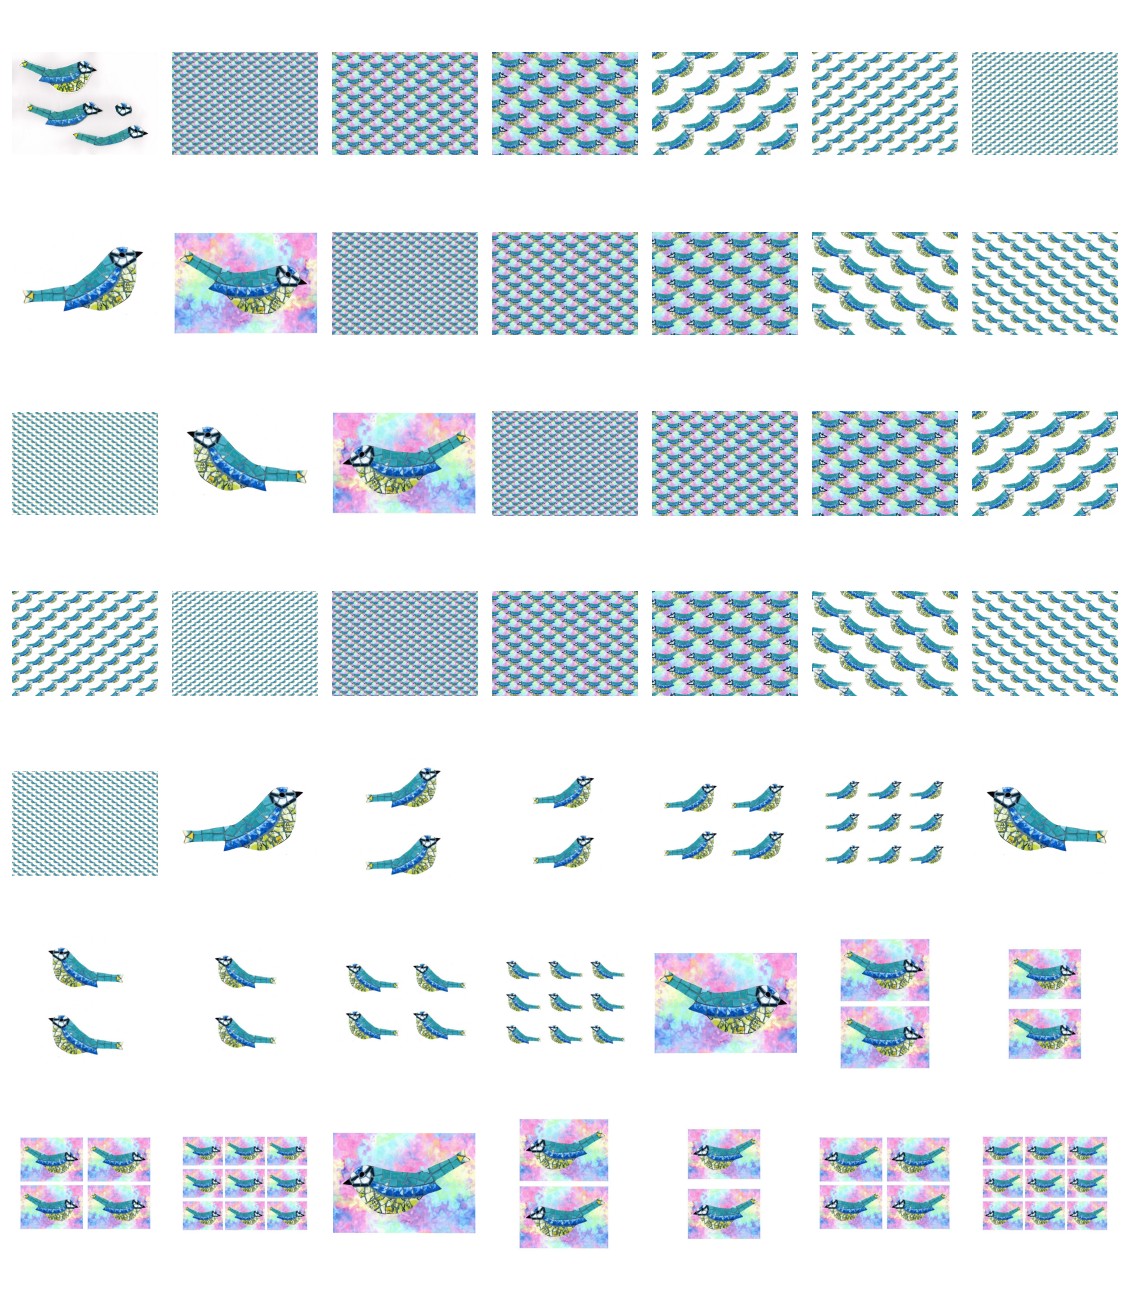 Tiled Effect Birds - Set 12 - 48 Pages to Download